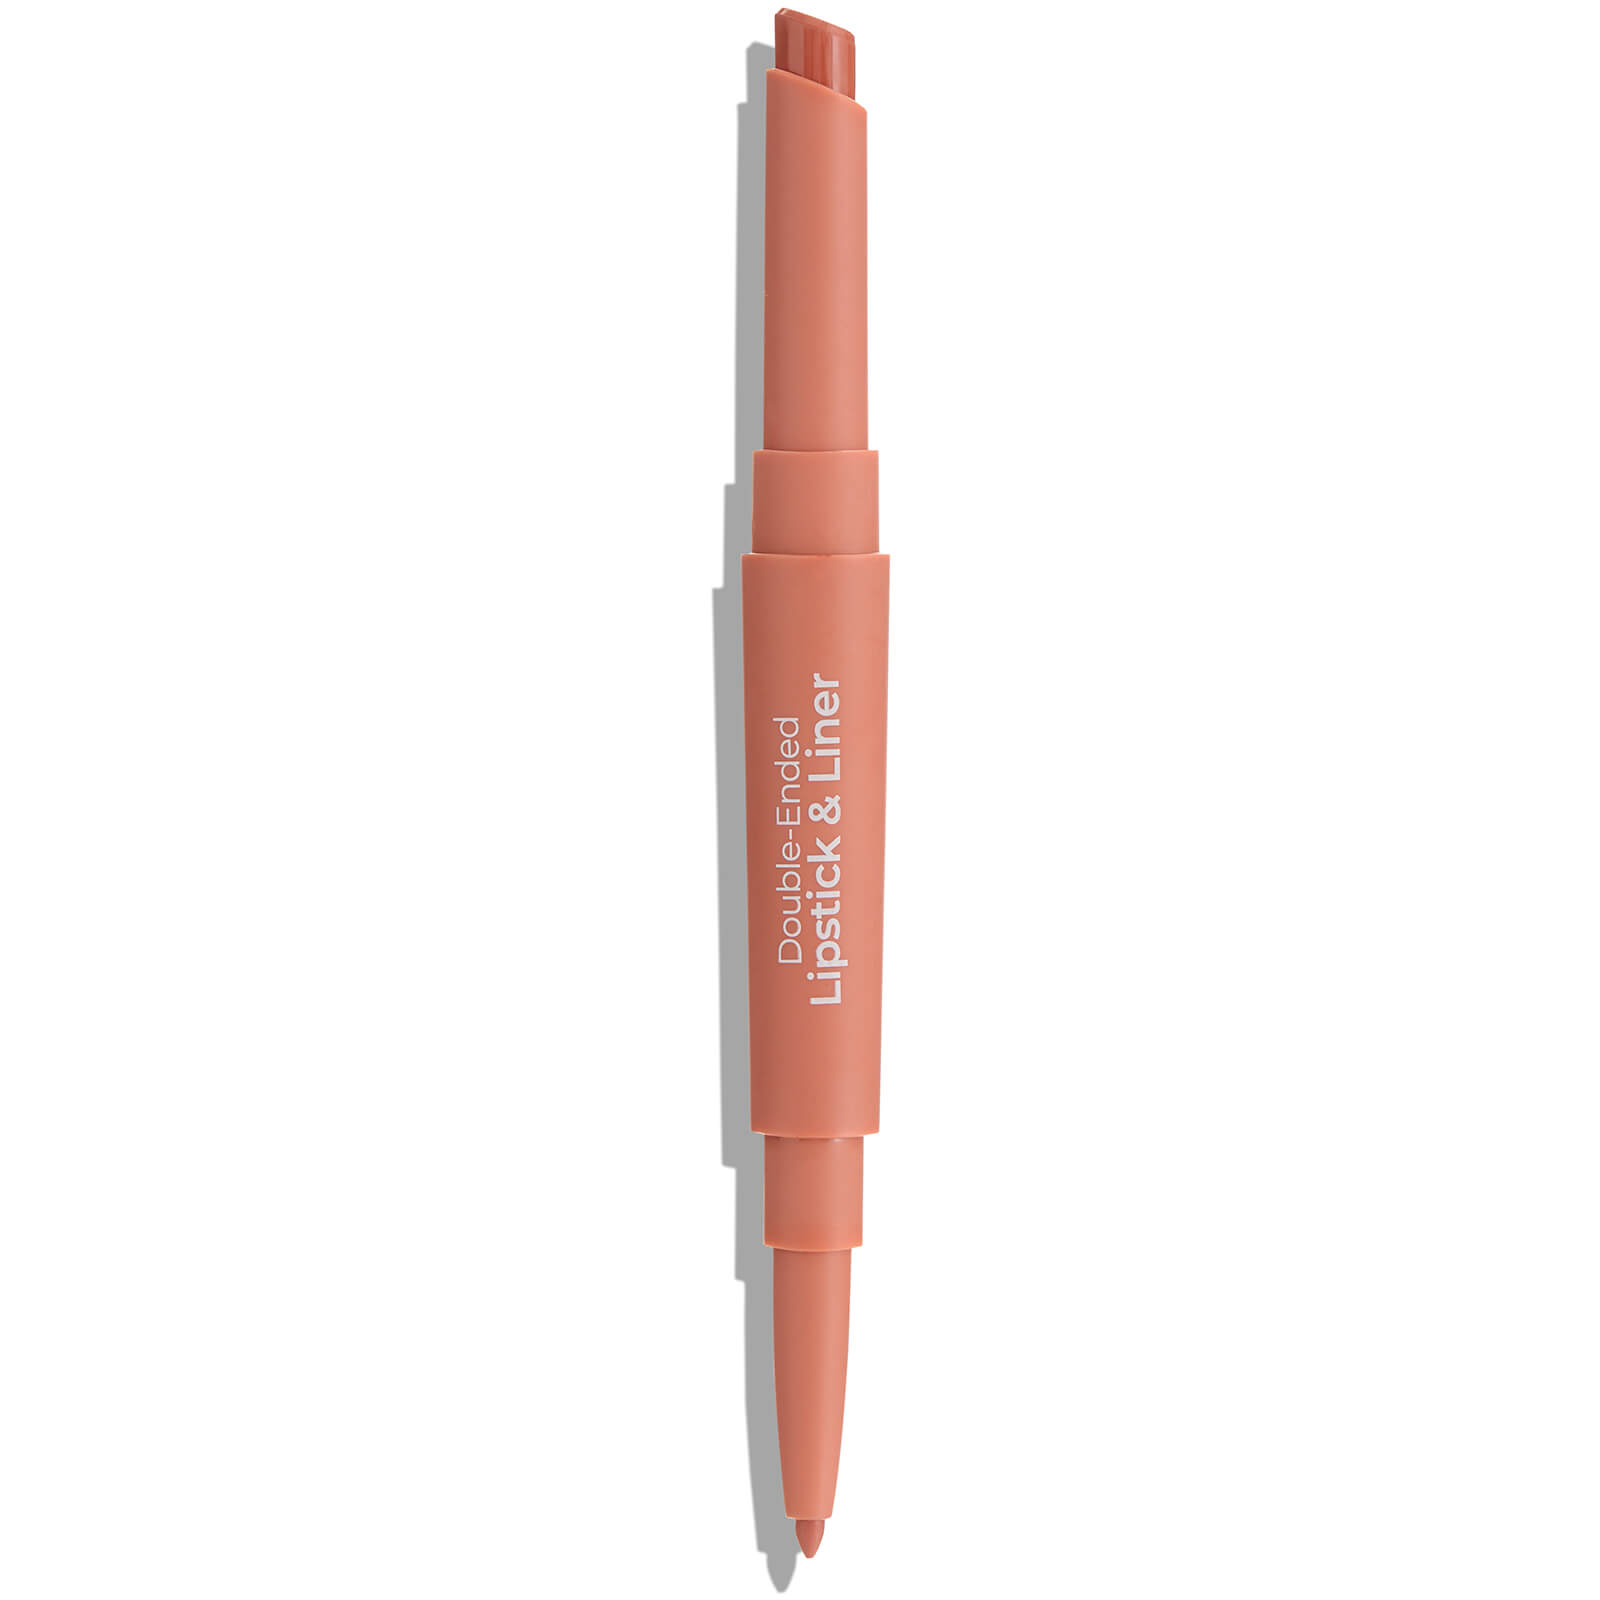 MCoBeauty Double Ended Lipstick and Liner 1.6g (Various Shades) - Natural Peach